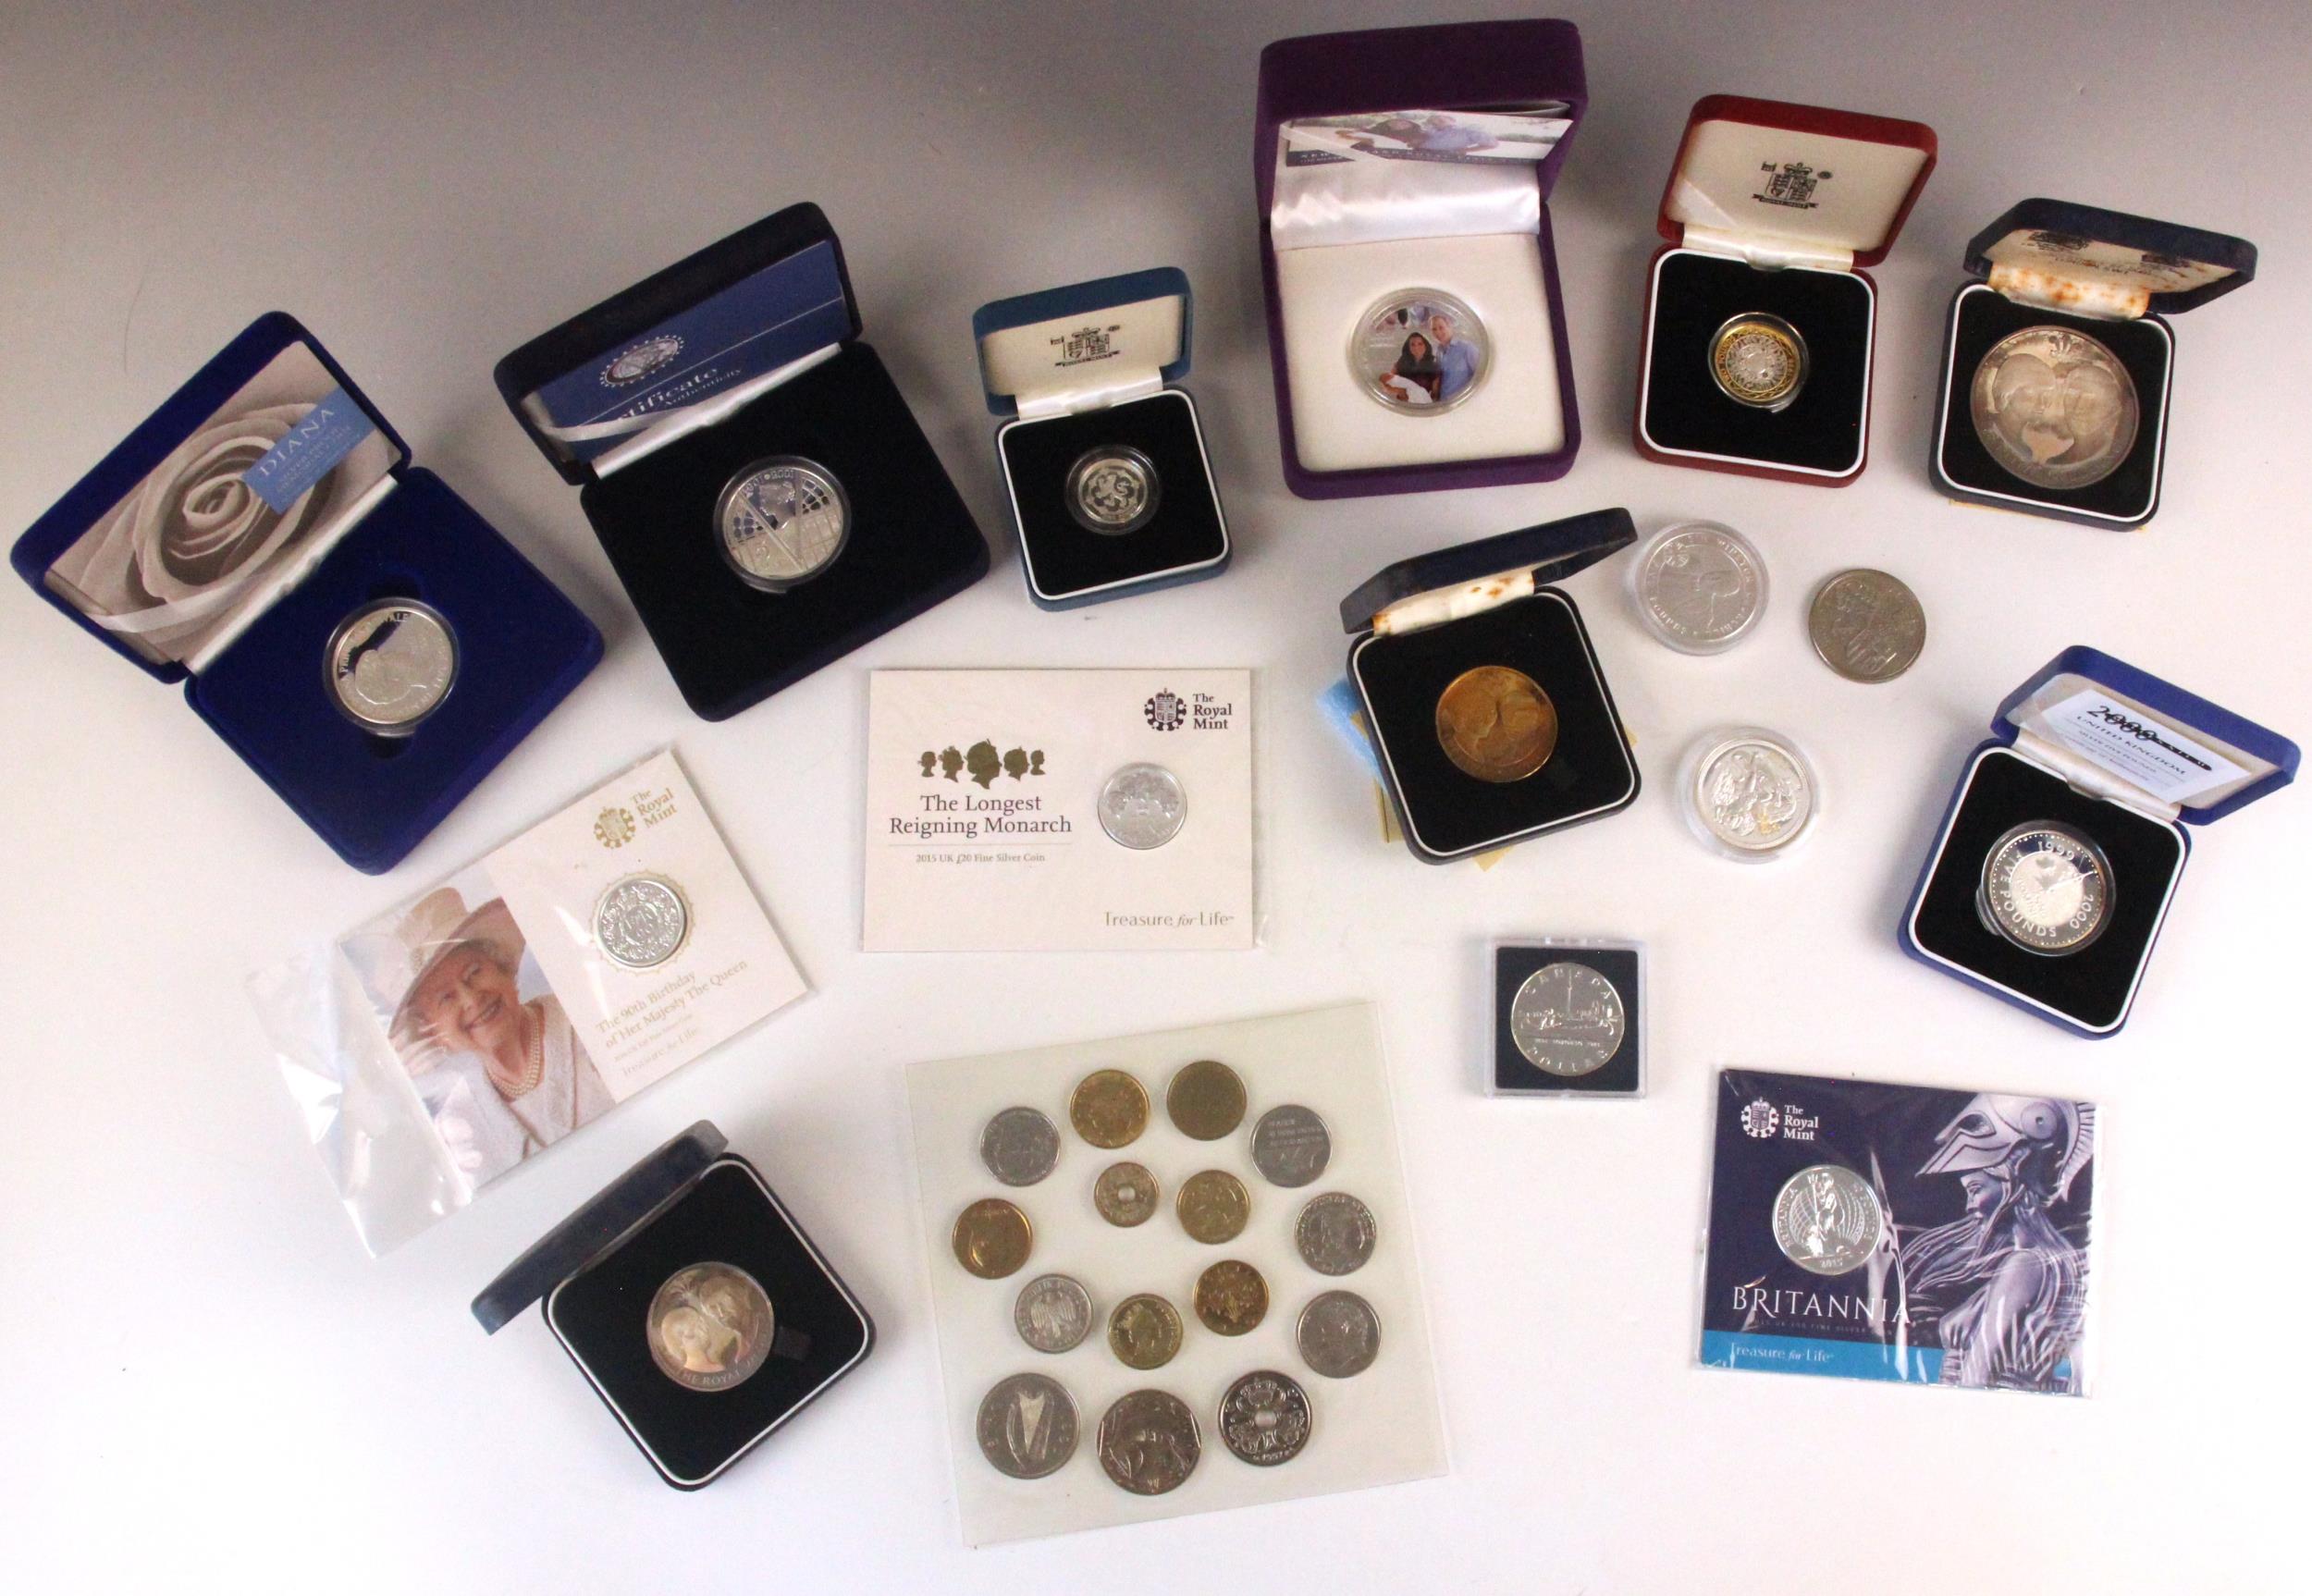 A collection of British commemorative coins, including silver proof £2 coin, £20 silver coins,